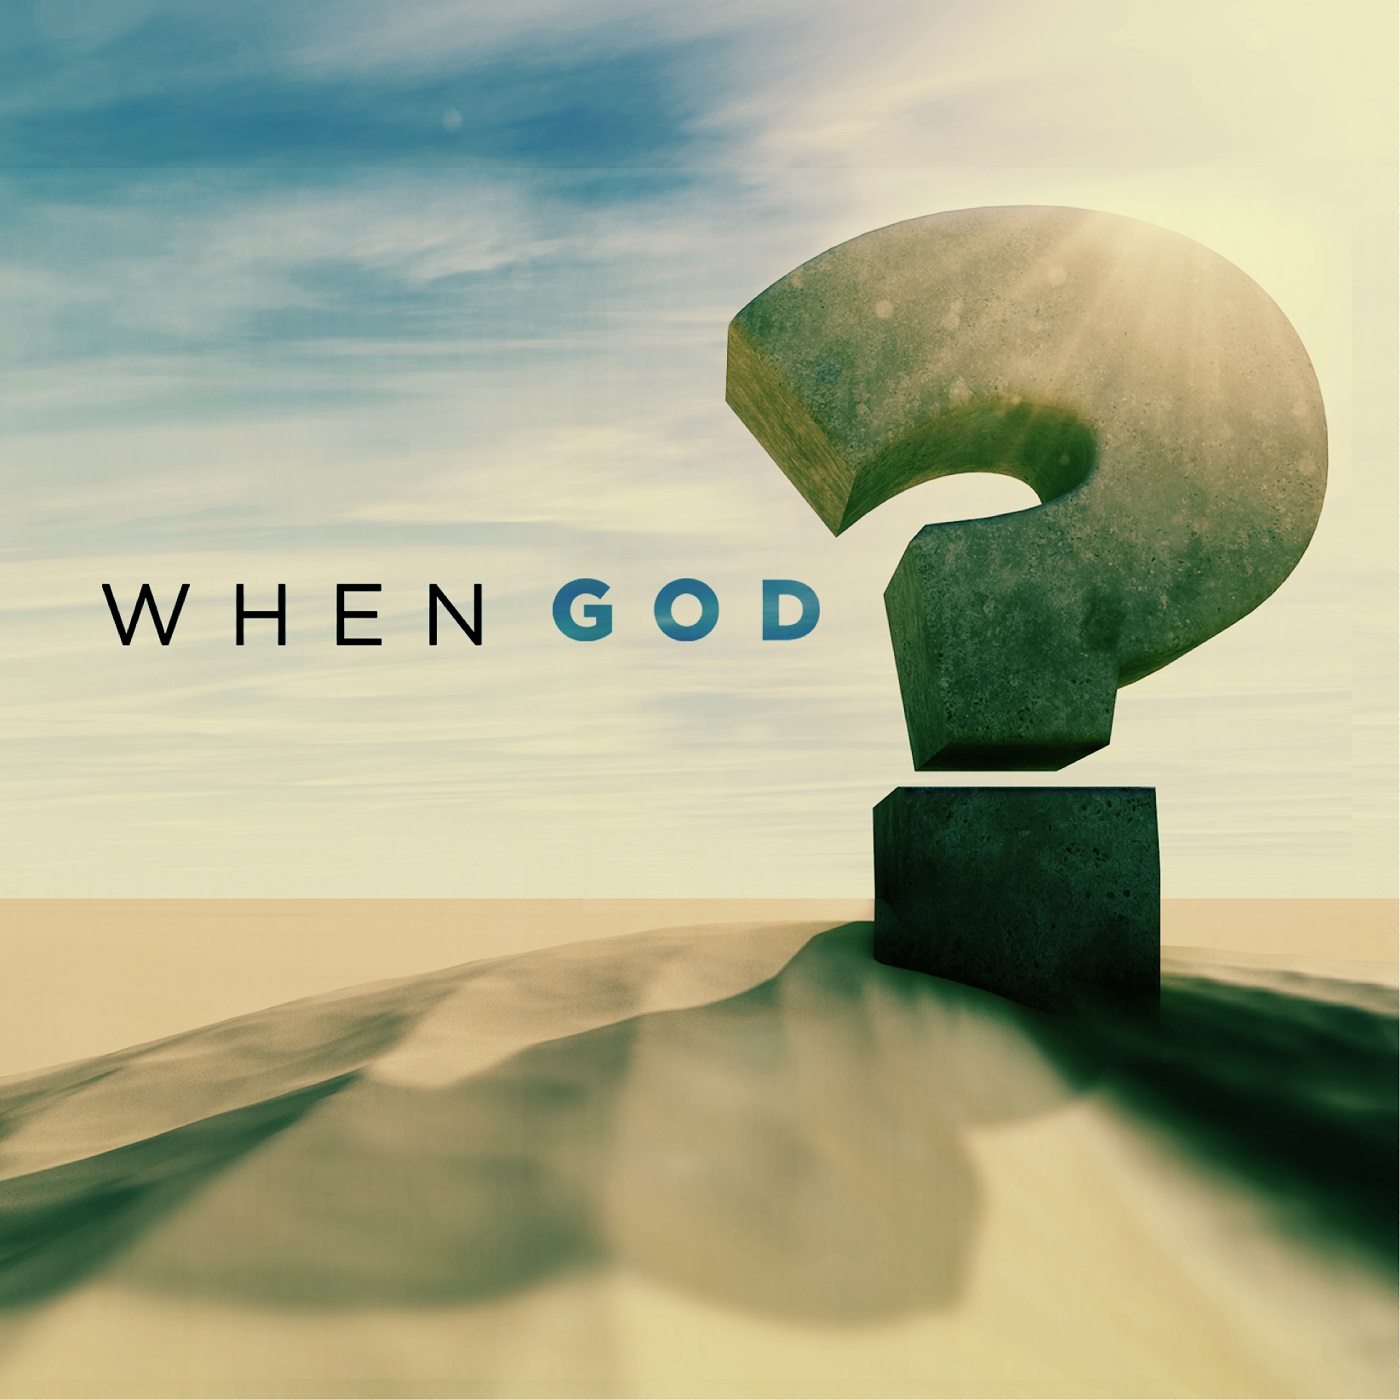 When God?: When God Is Late